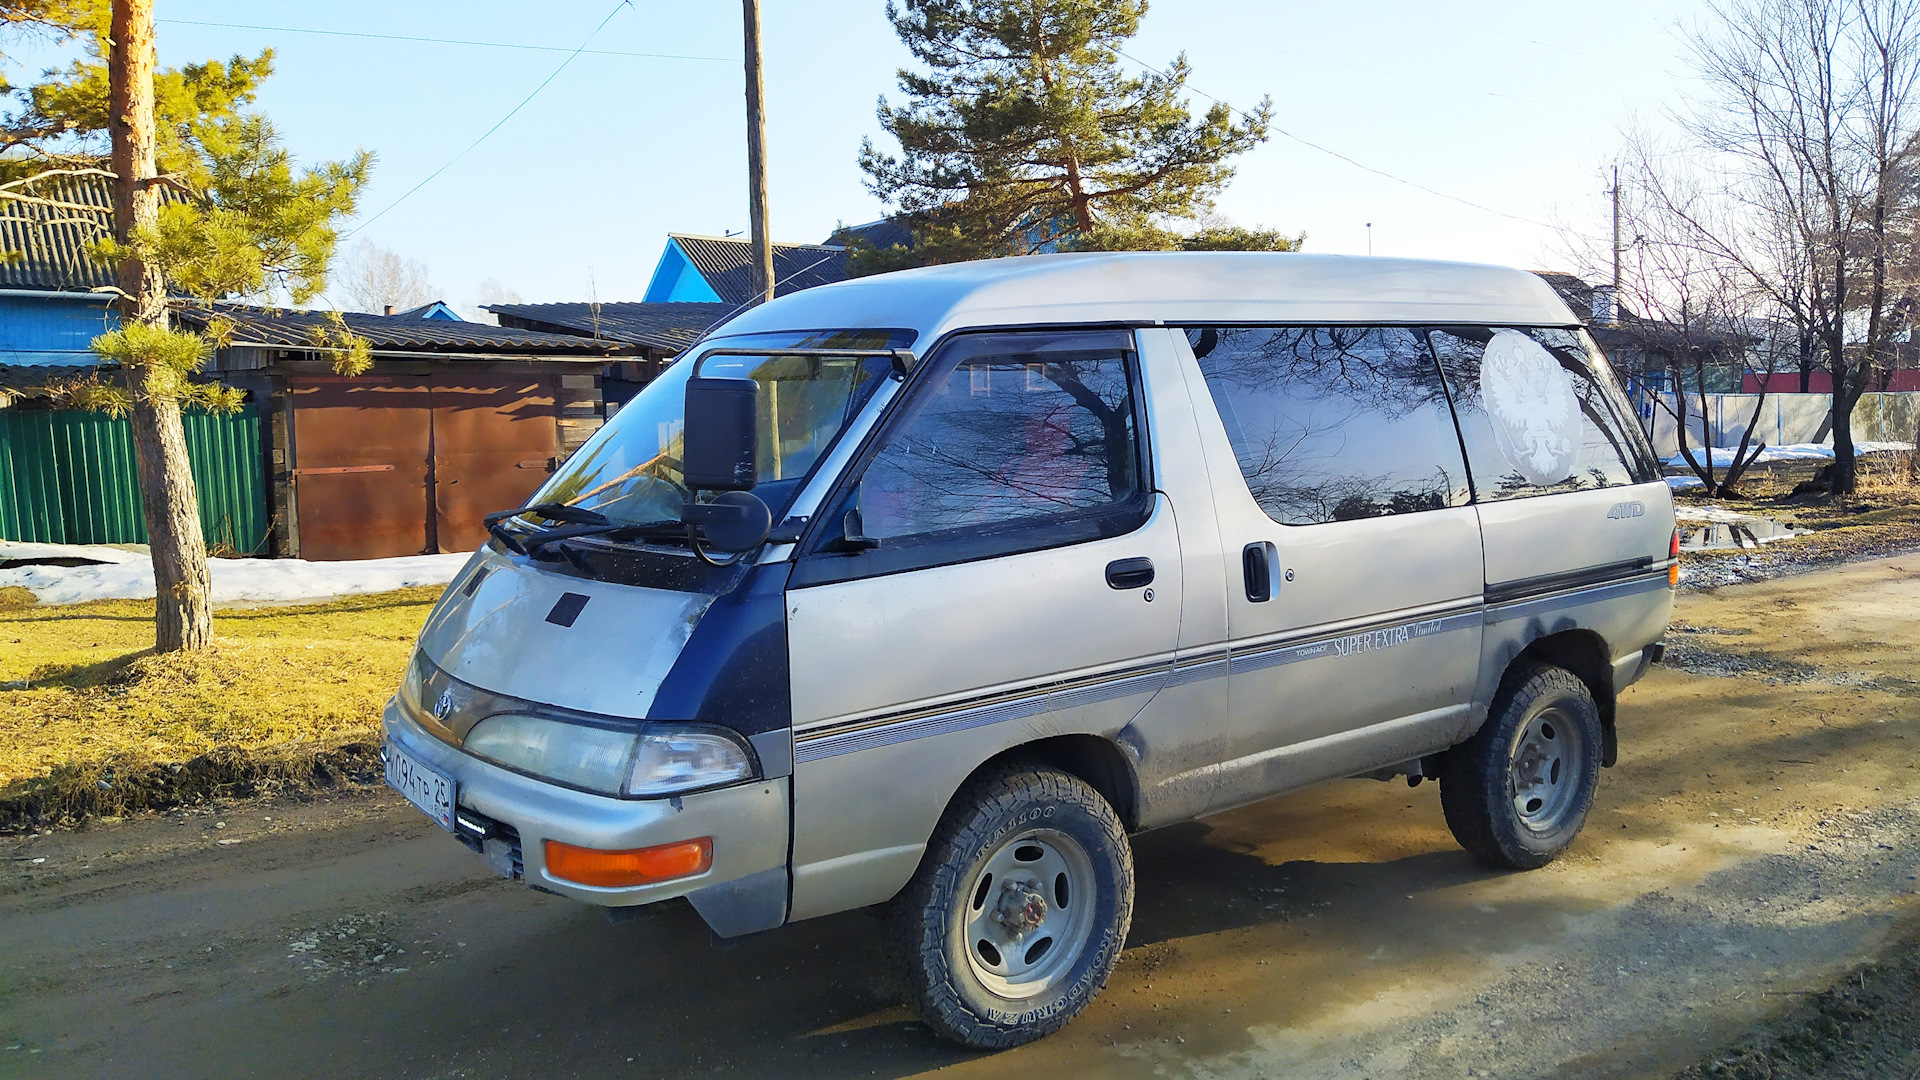 Toyota Town Ace 1984. Town Ace 31. Таун айс 89 года. Toyota Town Ace 3, 95 года. Таун айс отзывы